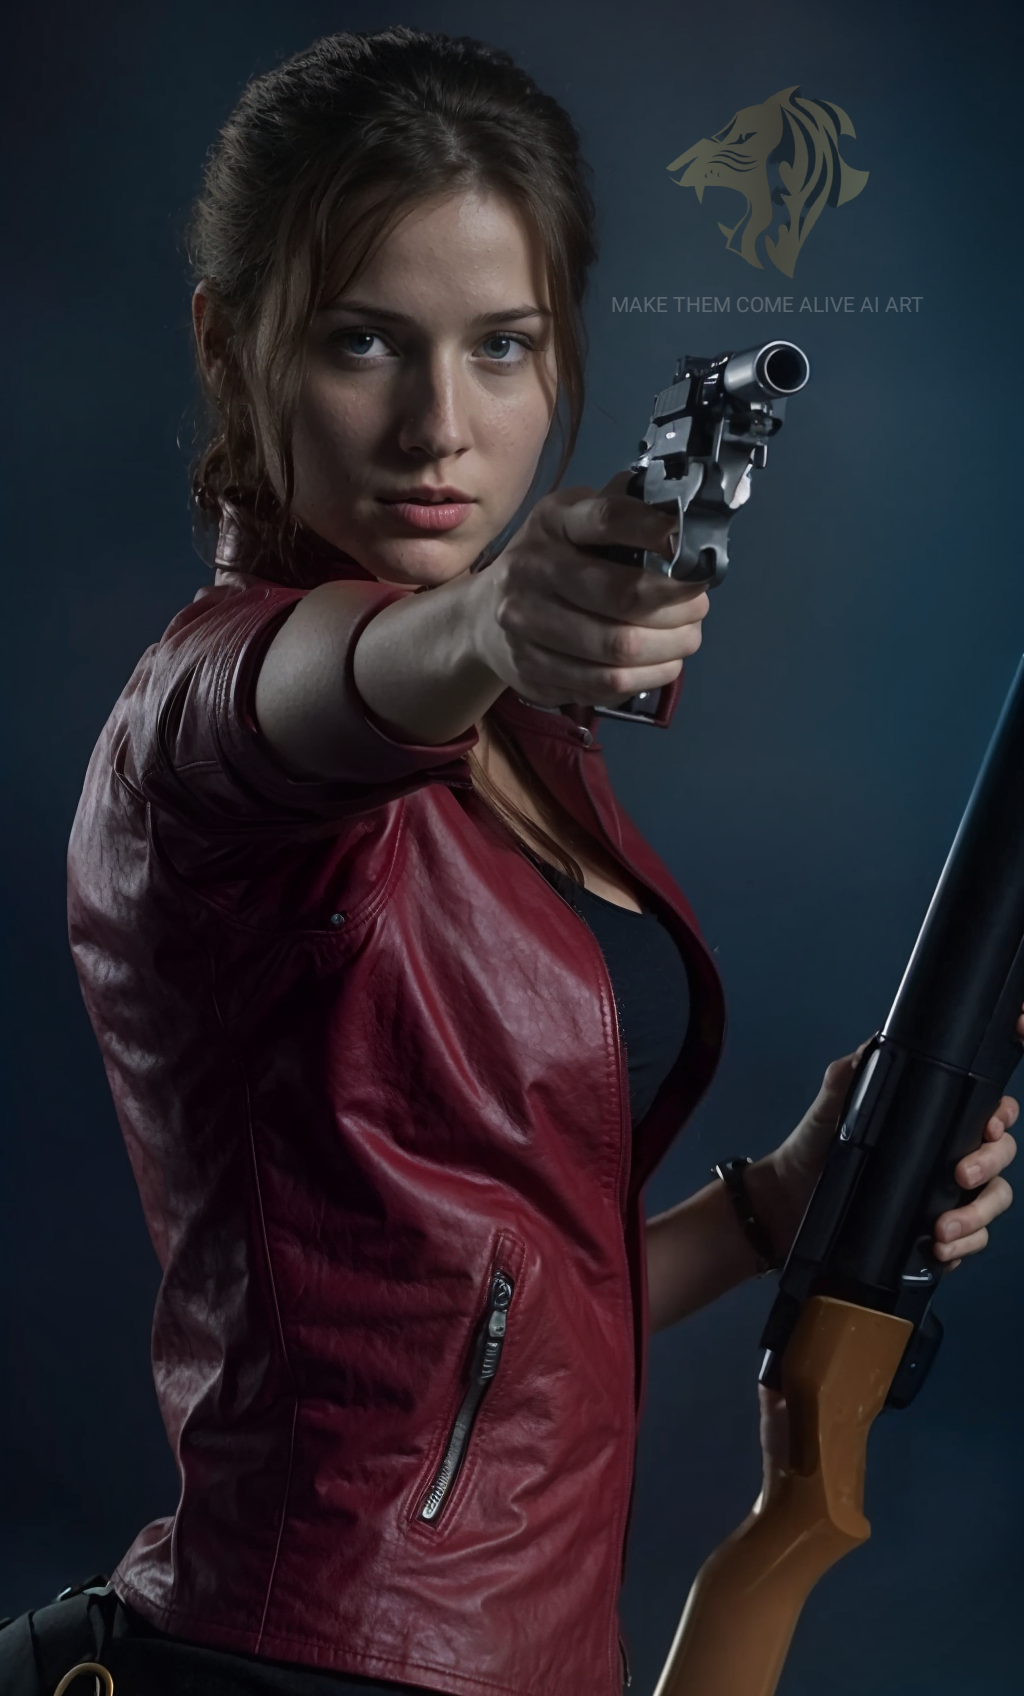 Claire Redfield (Resident Evil 2: Original) by rukaaxu on DeviantArt